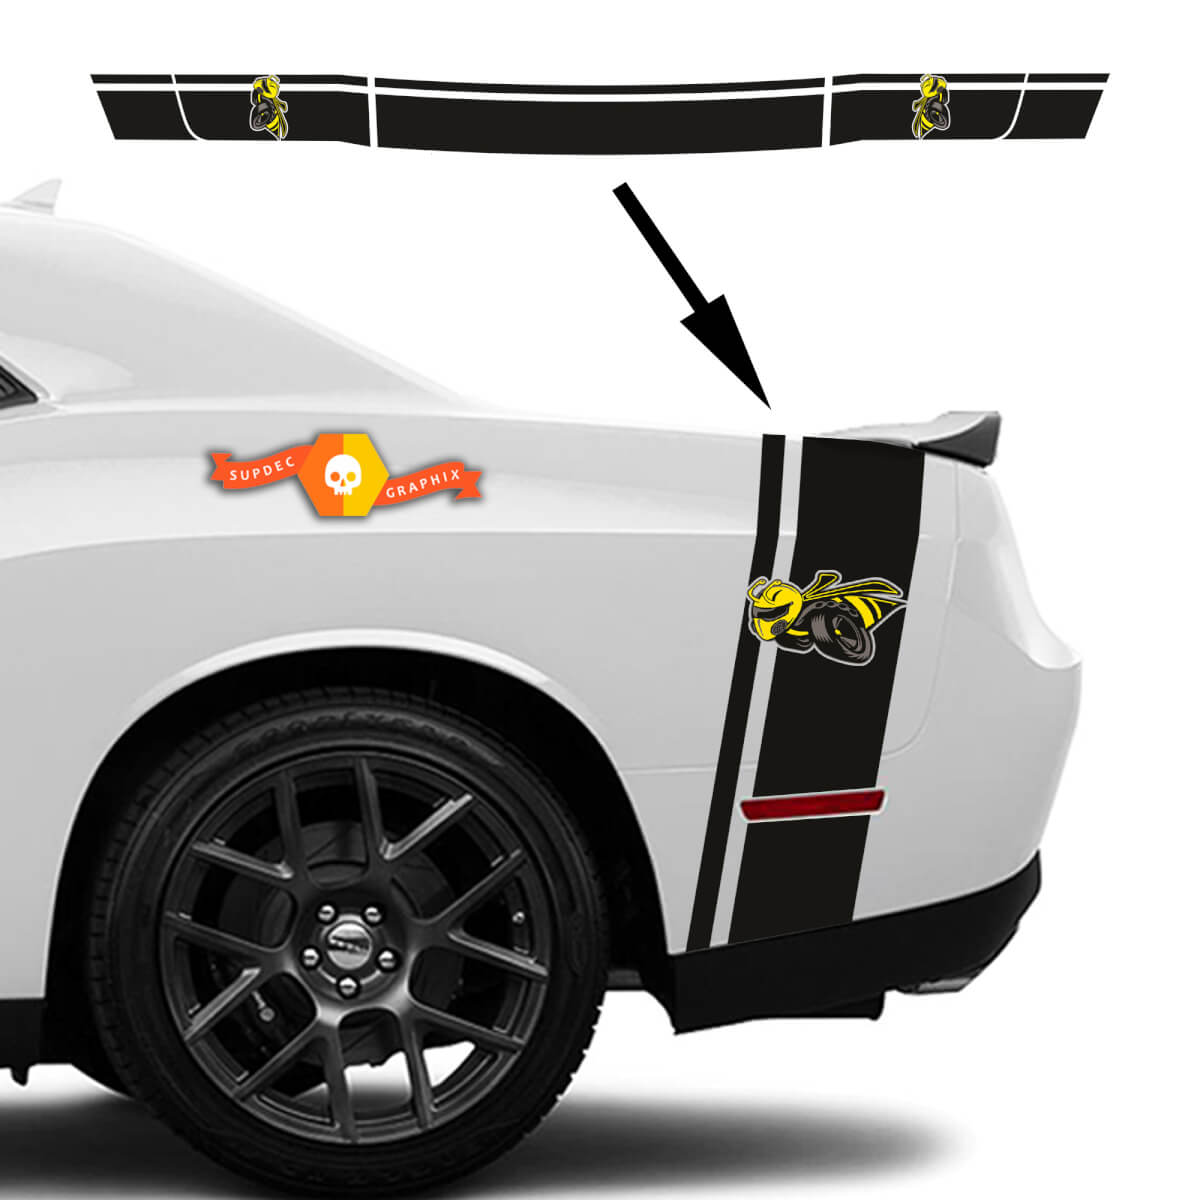 Kit Dodge Challenger or Charger Drag Bee Tail Bed Rear Stripe Decal kit trunk 2